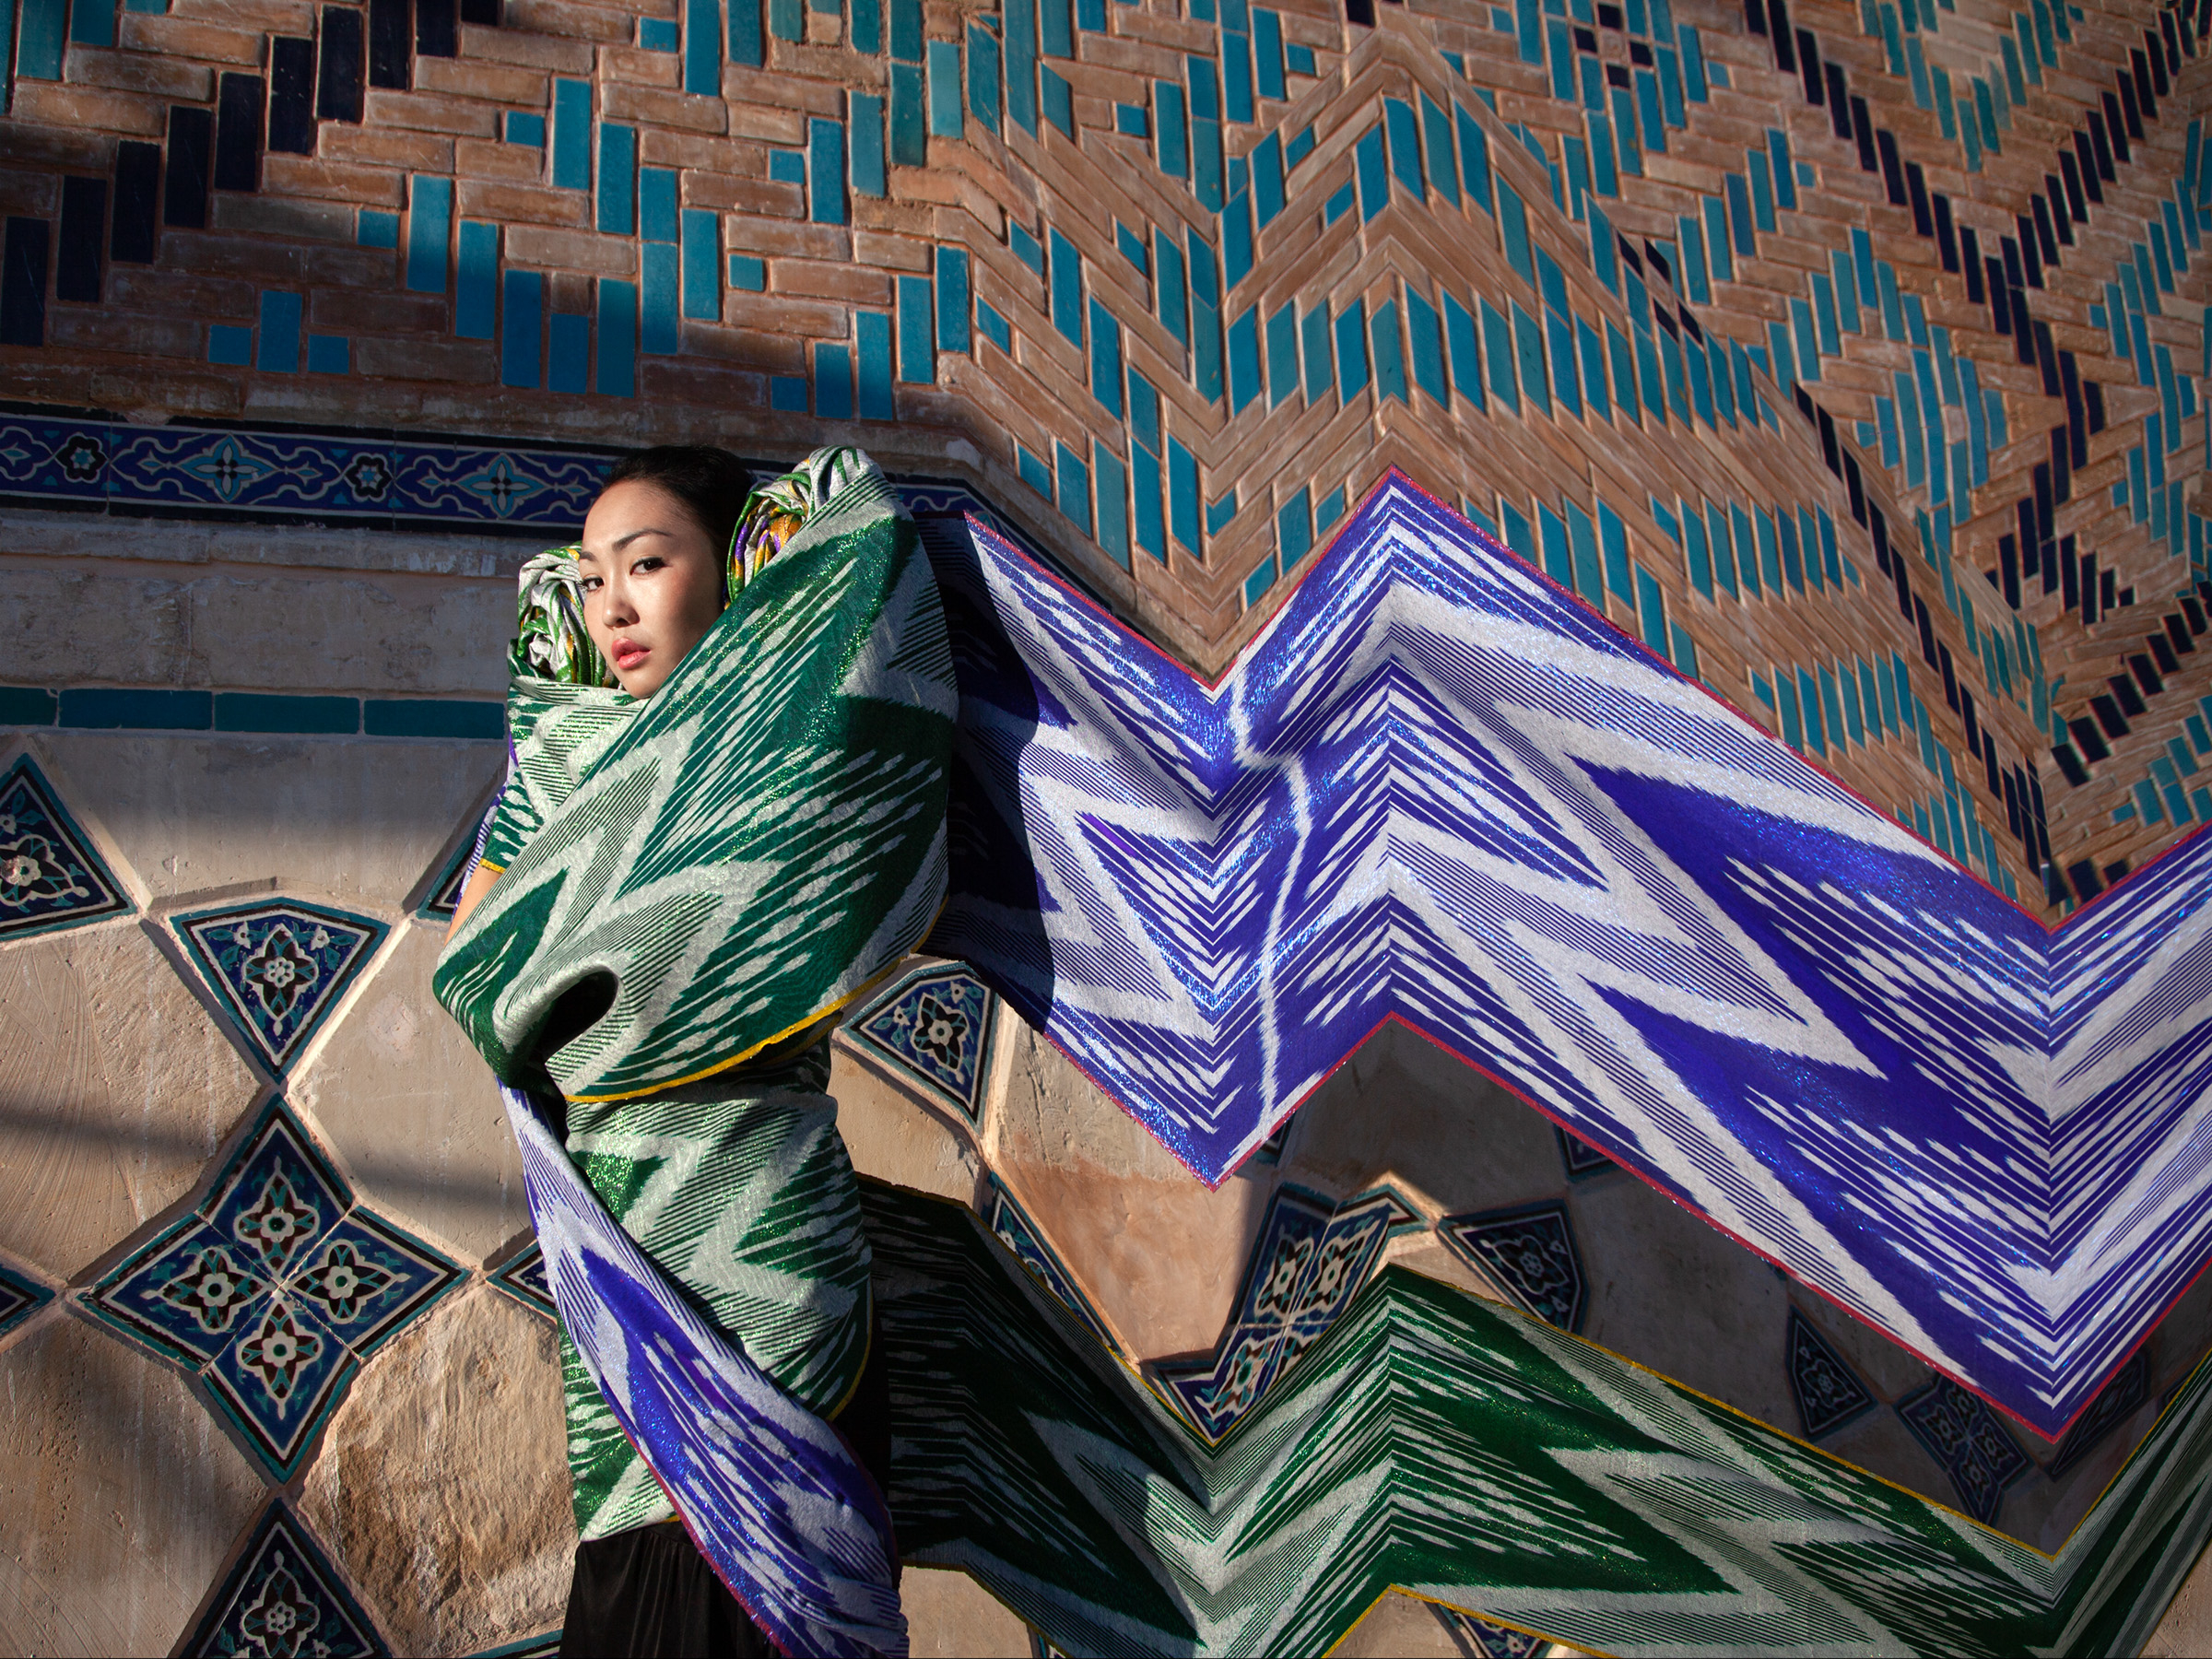 Almagul Menlibayeva, Zig Zag #XI1022, 2011, from the series My Silk Road to You. Courtesy of the artist